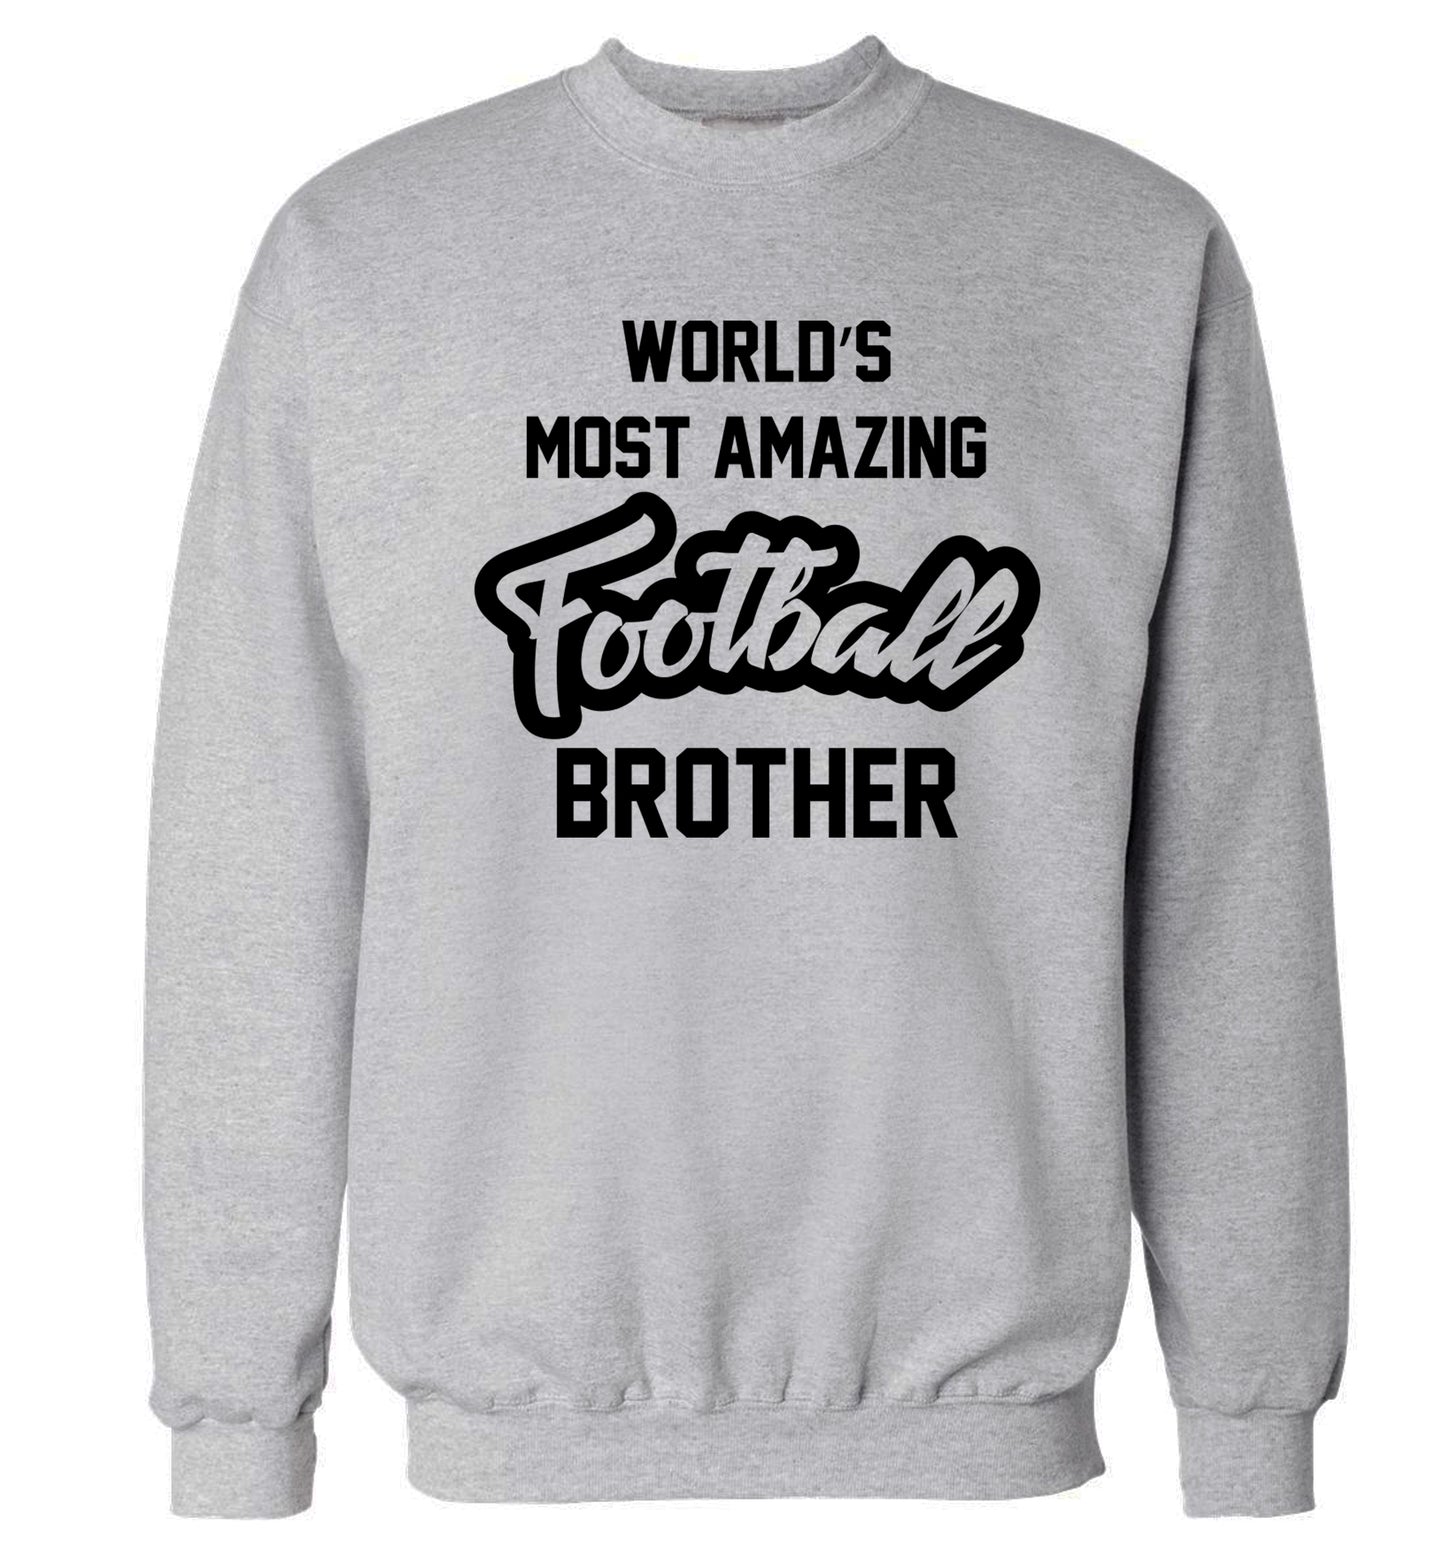 Worlds most amazing football brother Adult's unisexgrey Sweater 2XL